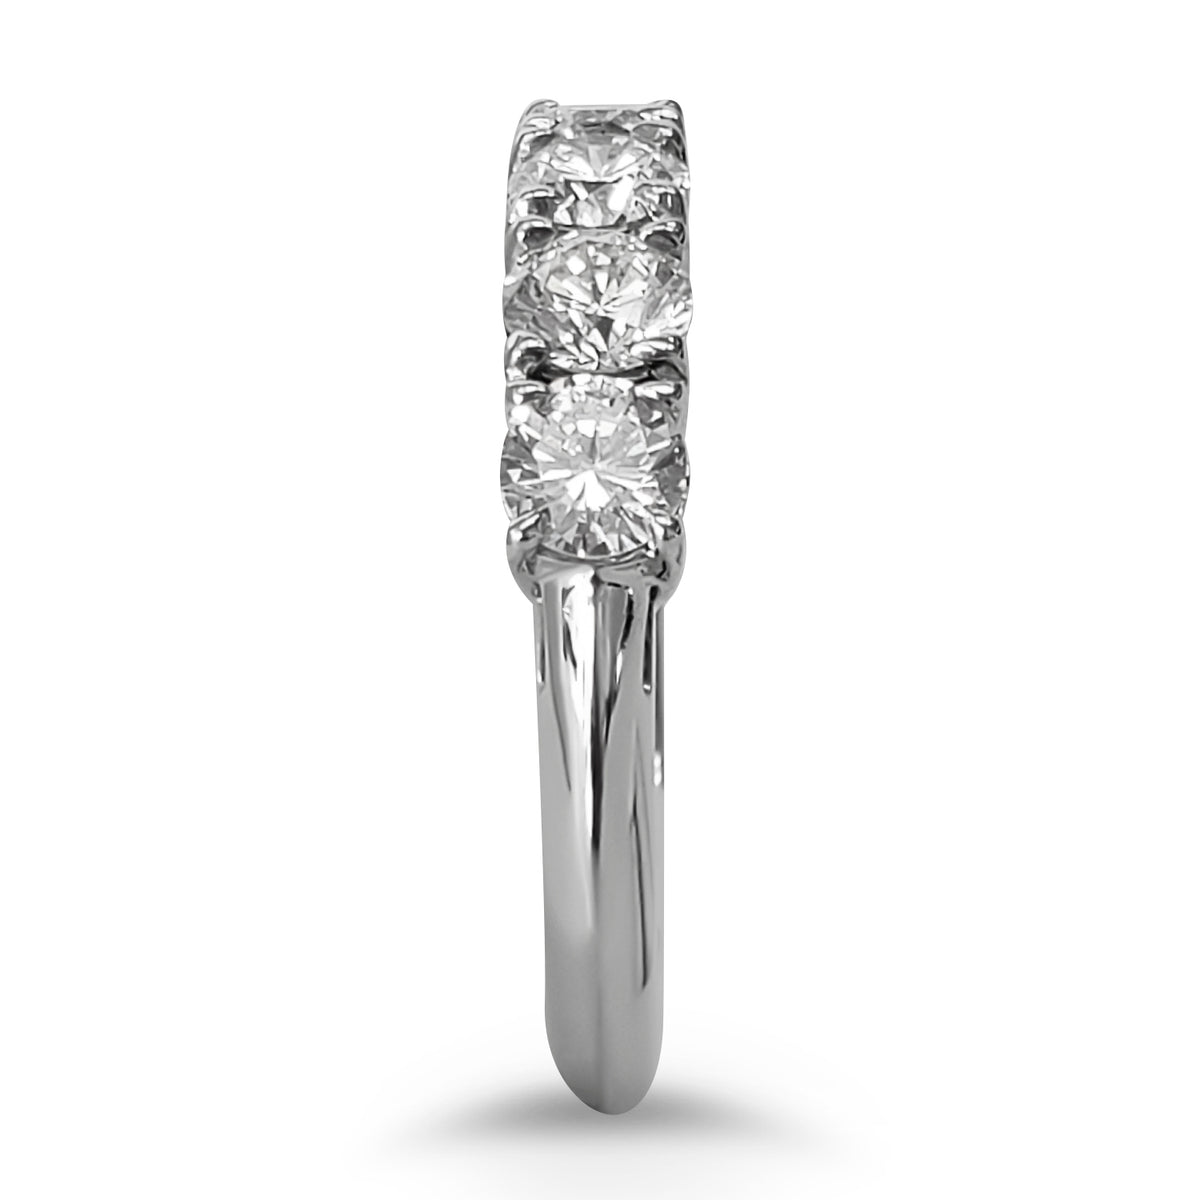 Diamond Band in Platinum with Approximately 0.70 Carat Total Weight